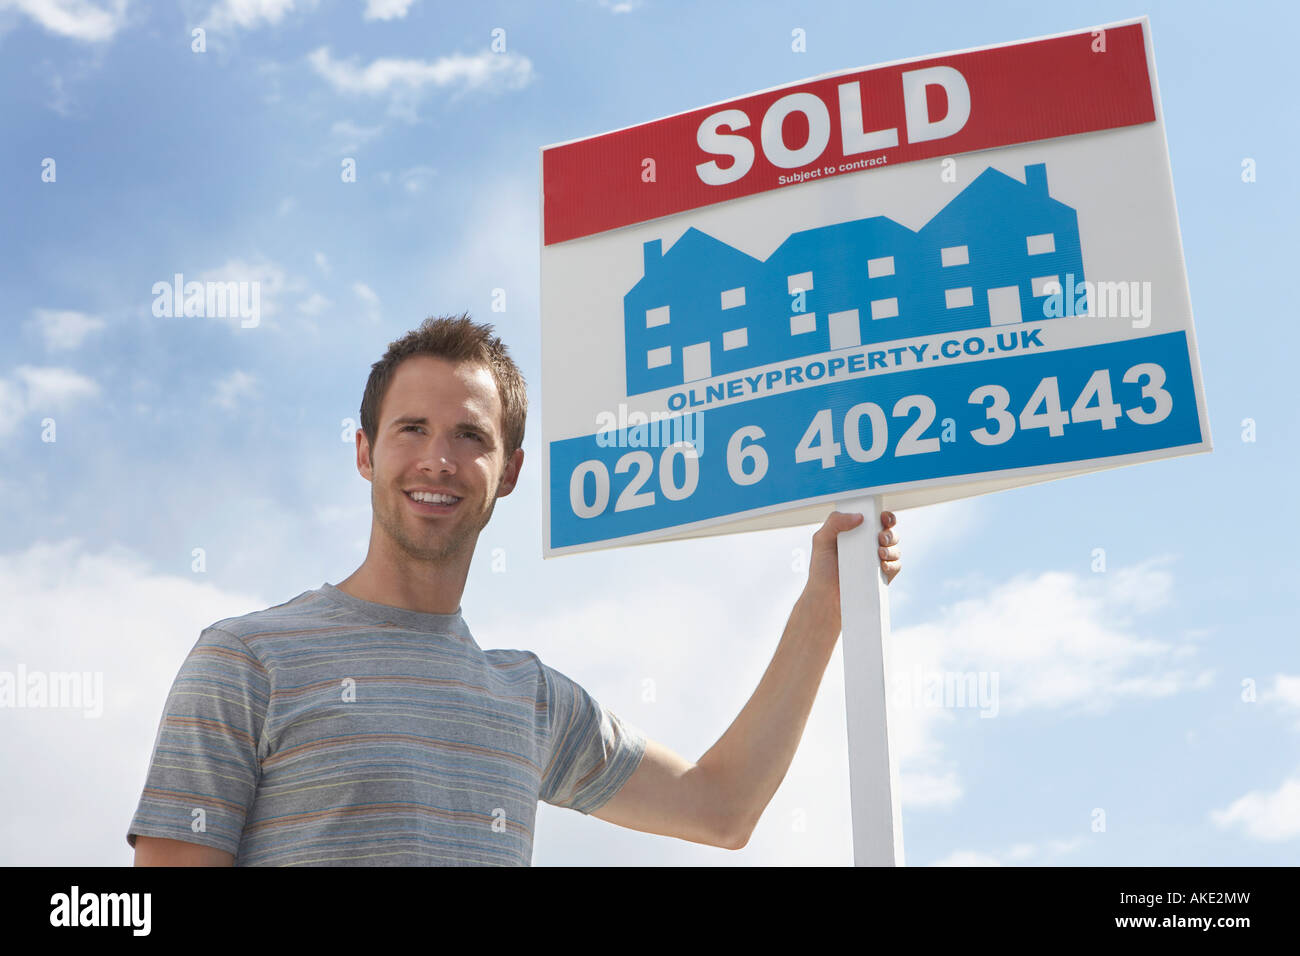 Man holding sold sign, against sky Stock Photo